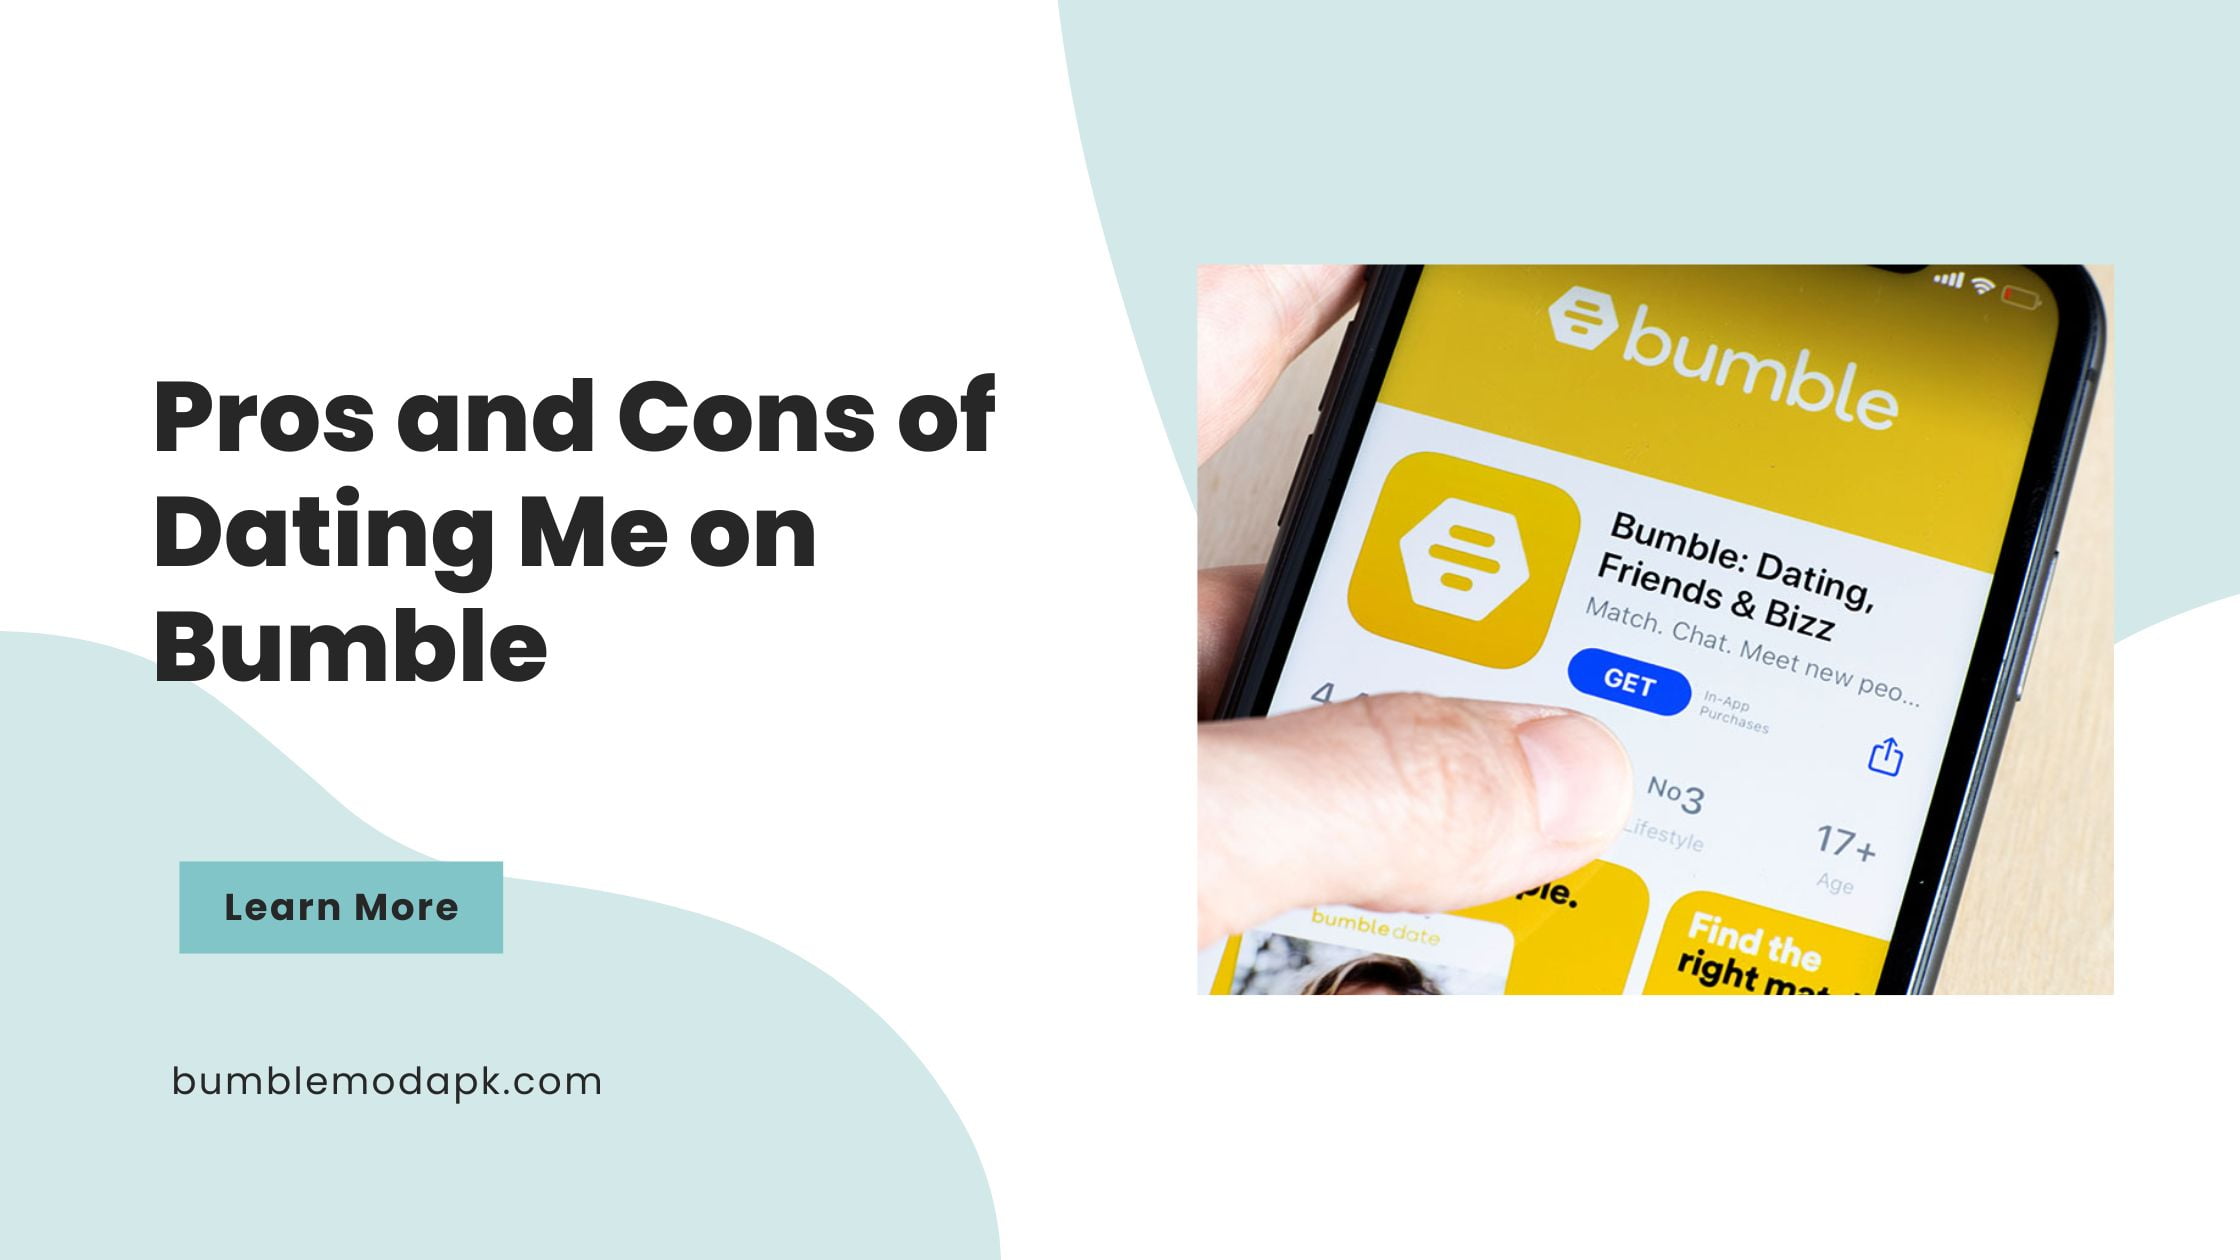 Pros and Cons of Dating Me on Bumble